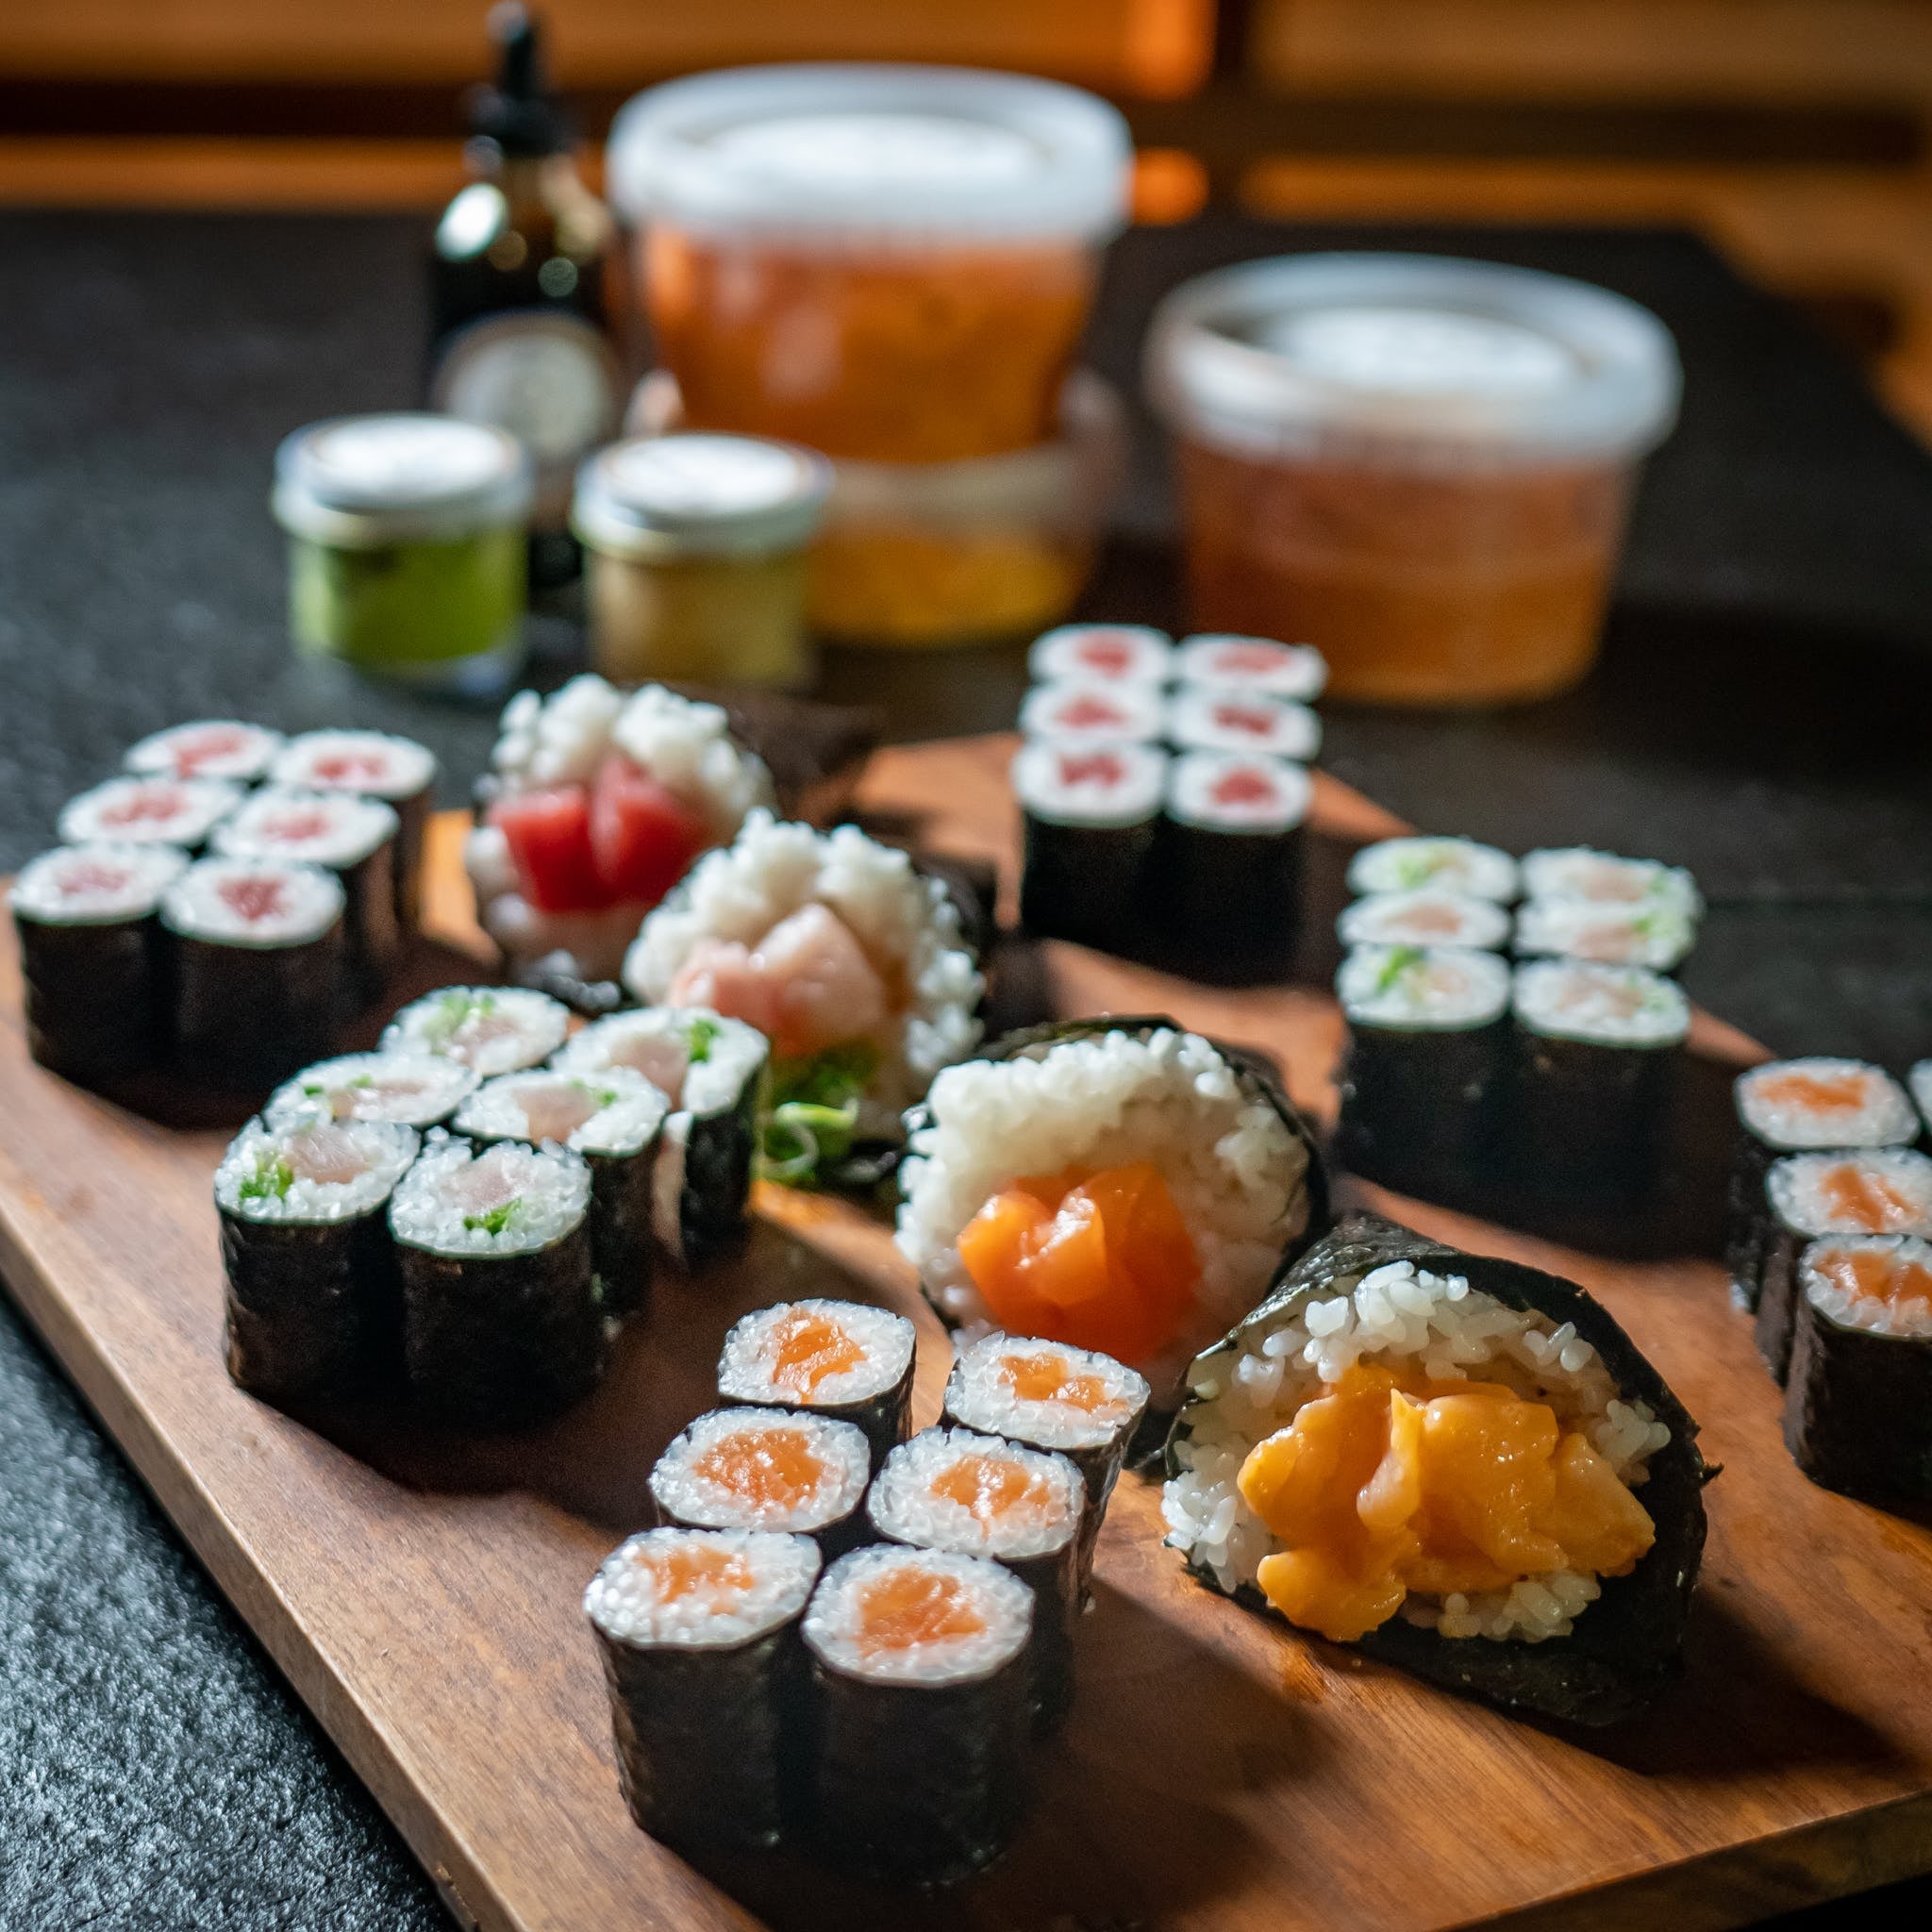 Sushi Ingredients, Kits and Equipment